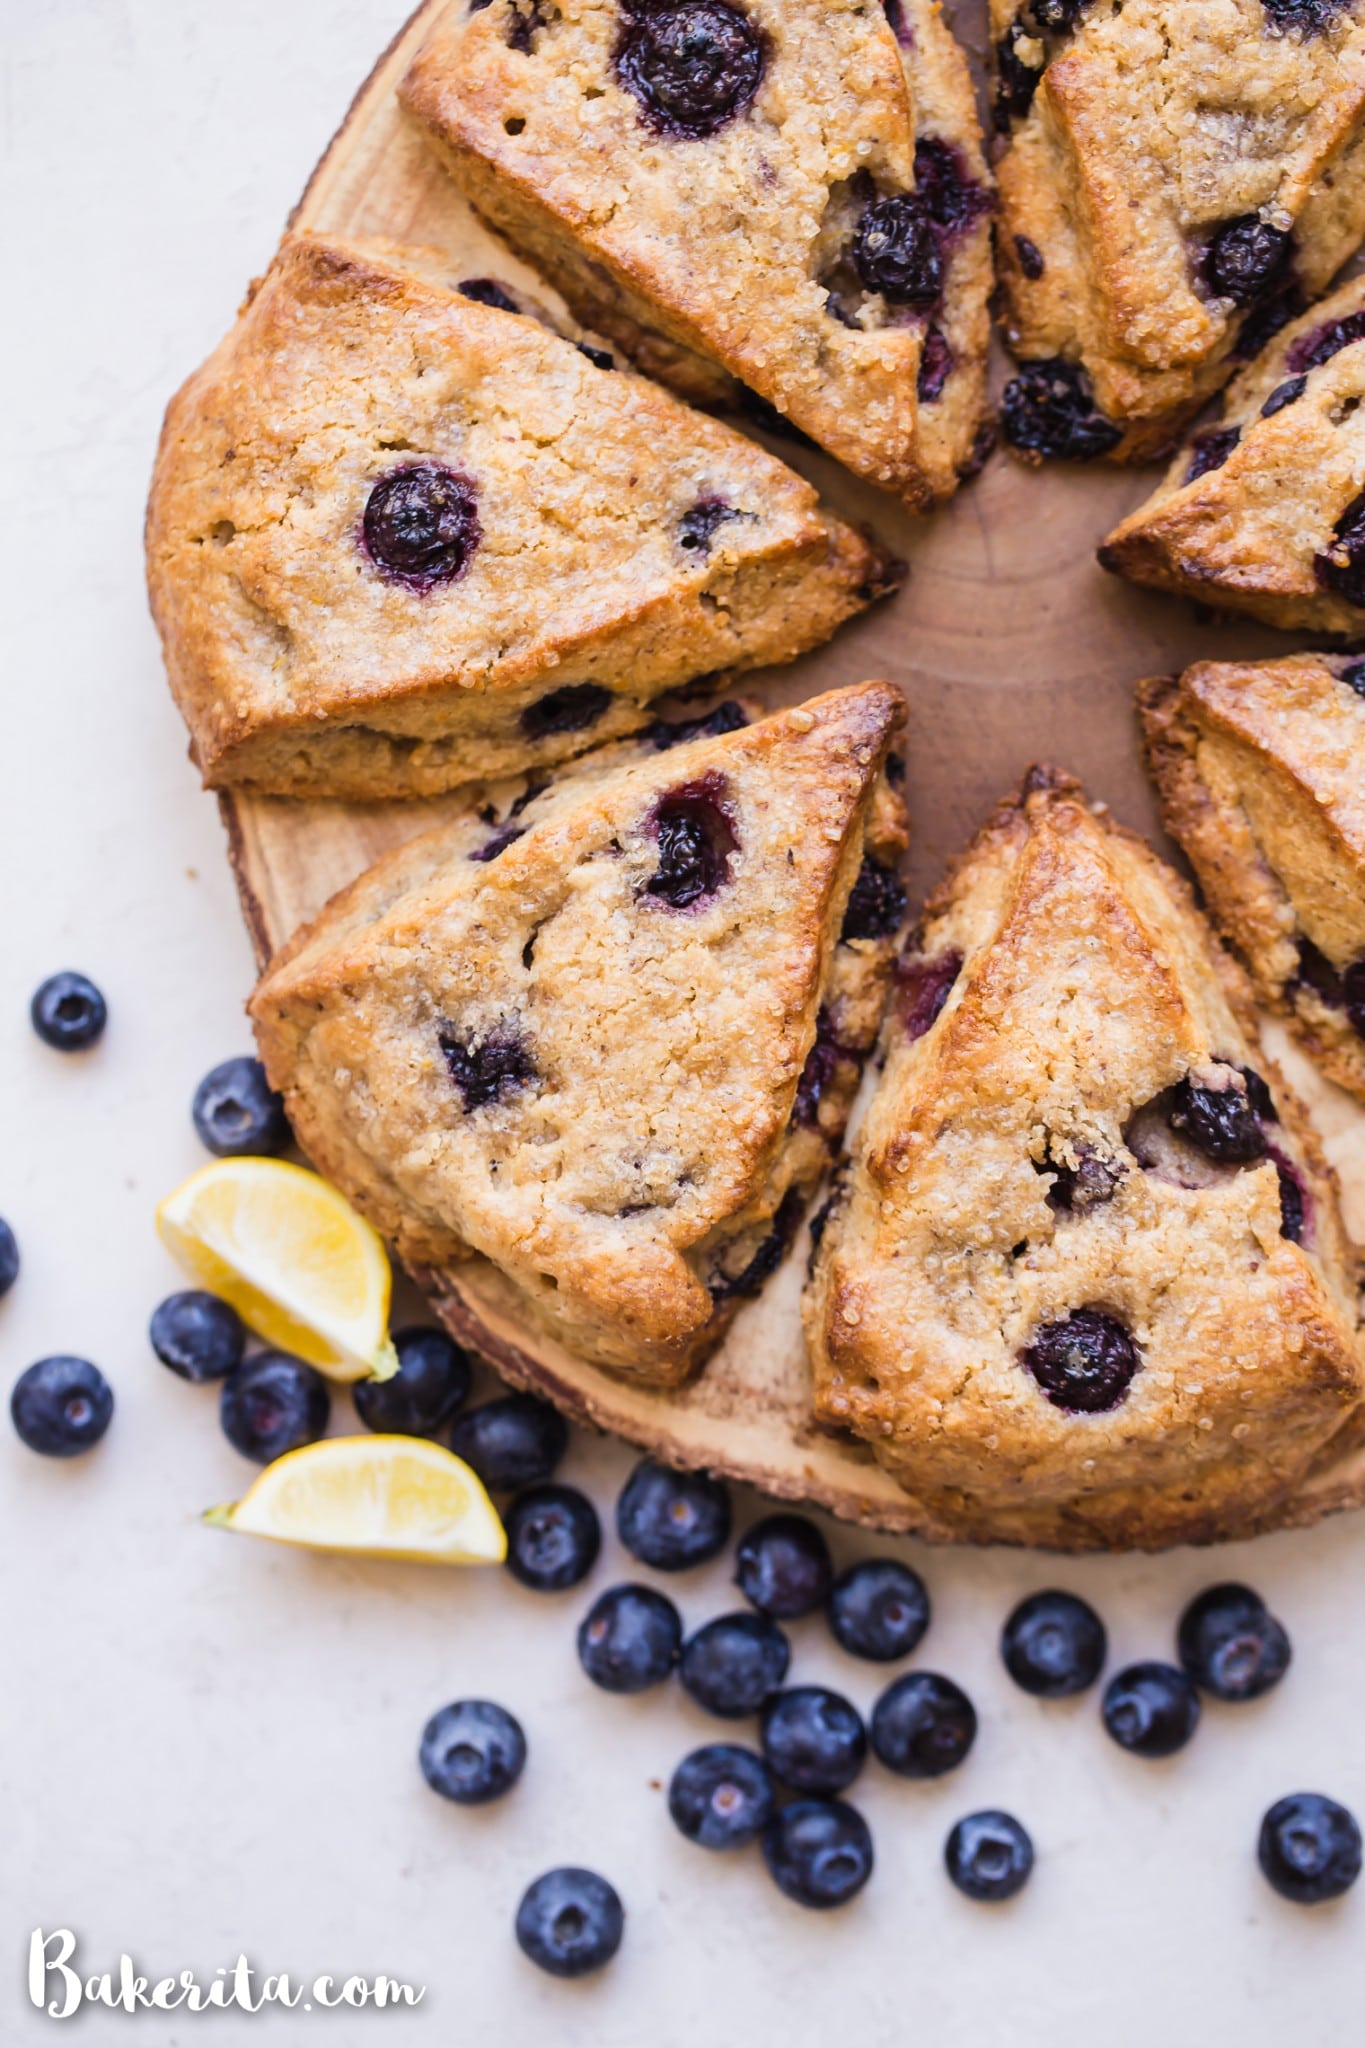 Gluten-Free Vegan Lemon Blueberry Scones are going to become your new favorite breakfast and snack. They have a tender texture with a crispy exterior and are full of bright, lemony flavor. 